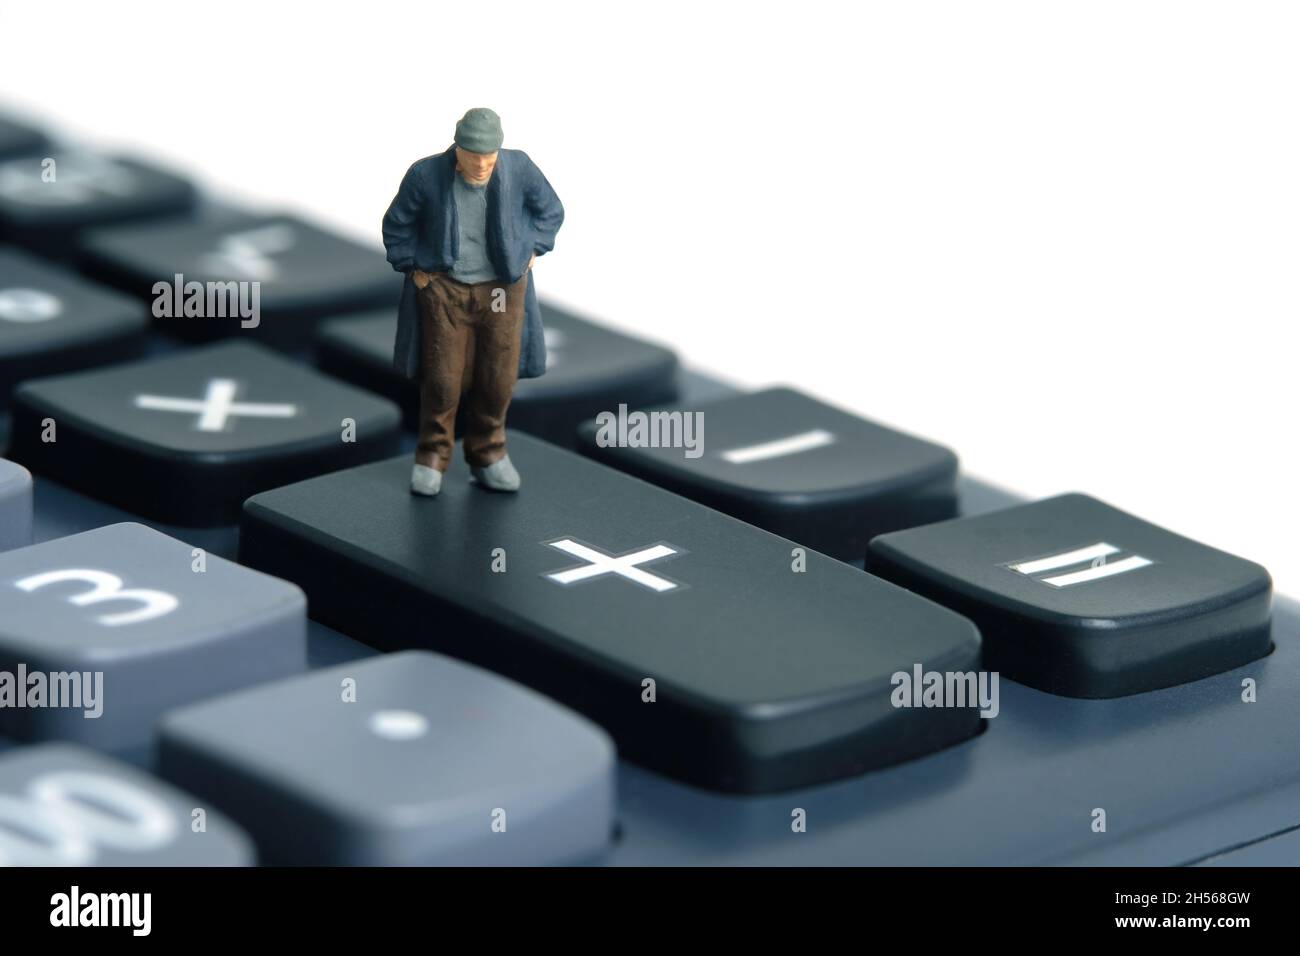 Poor man with no money left standing above calculator. Miniature tiny people toys photography. isolated on white background. Stock Photo